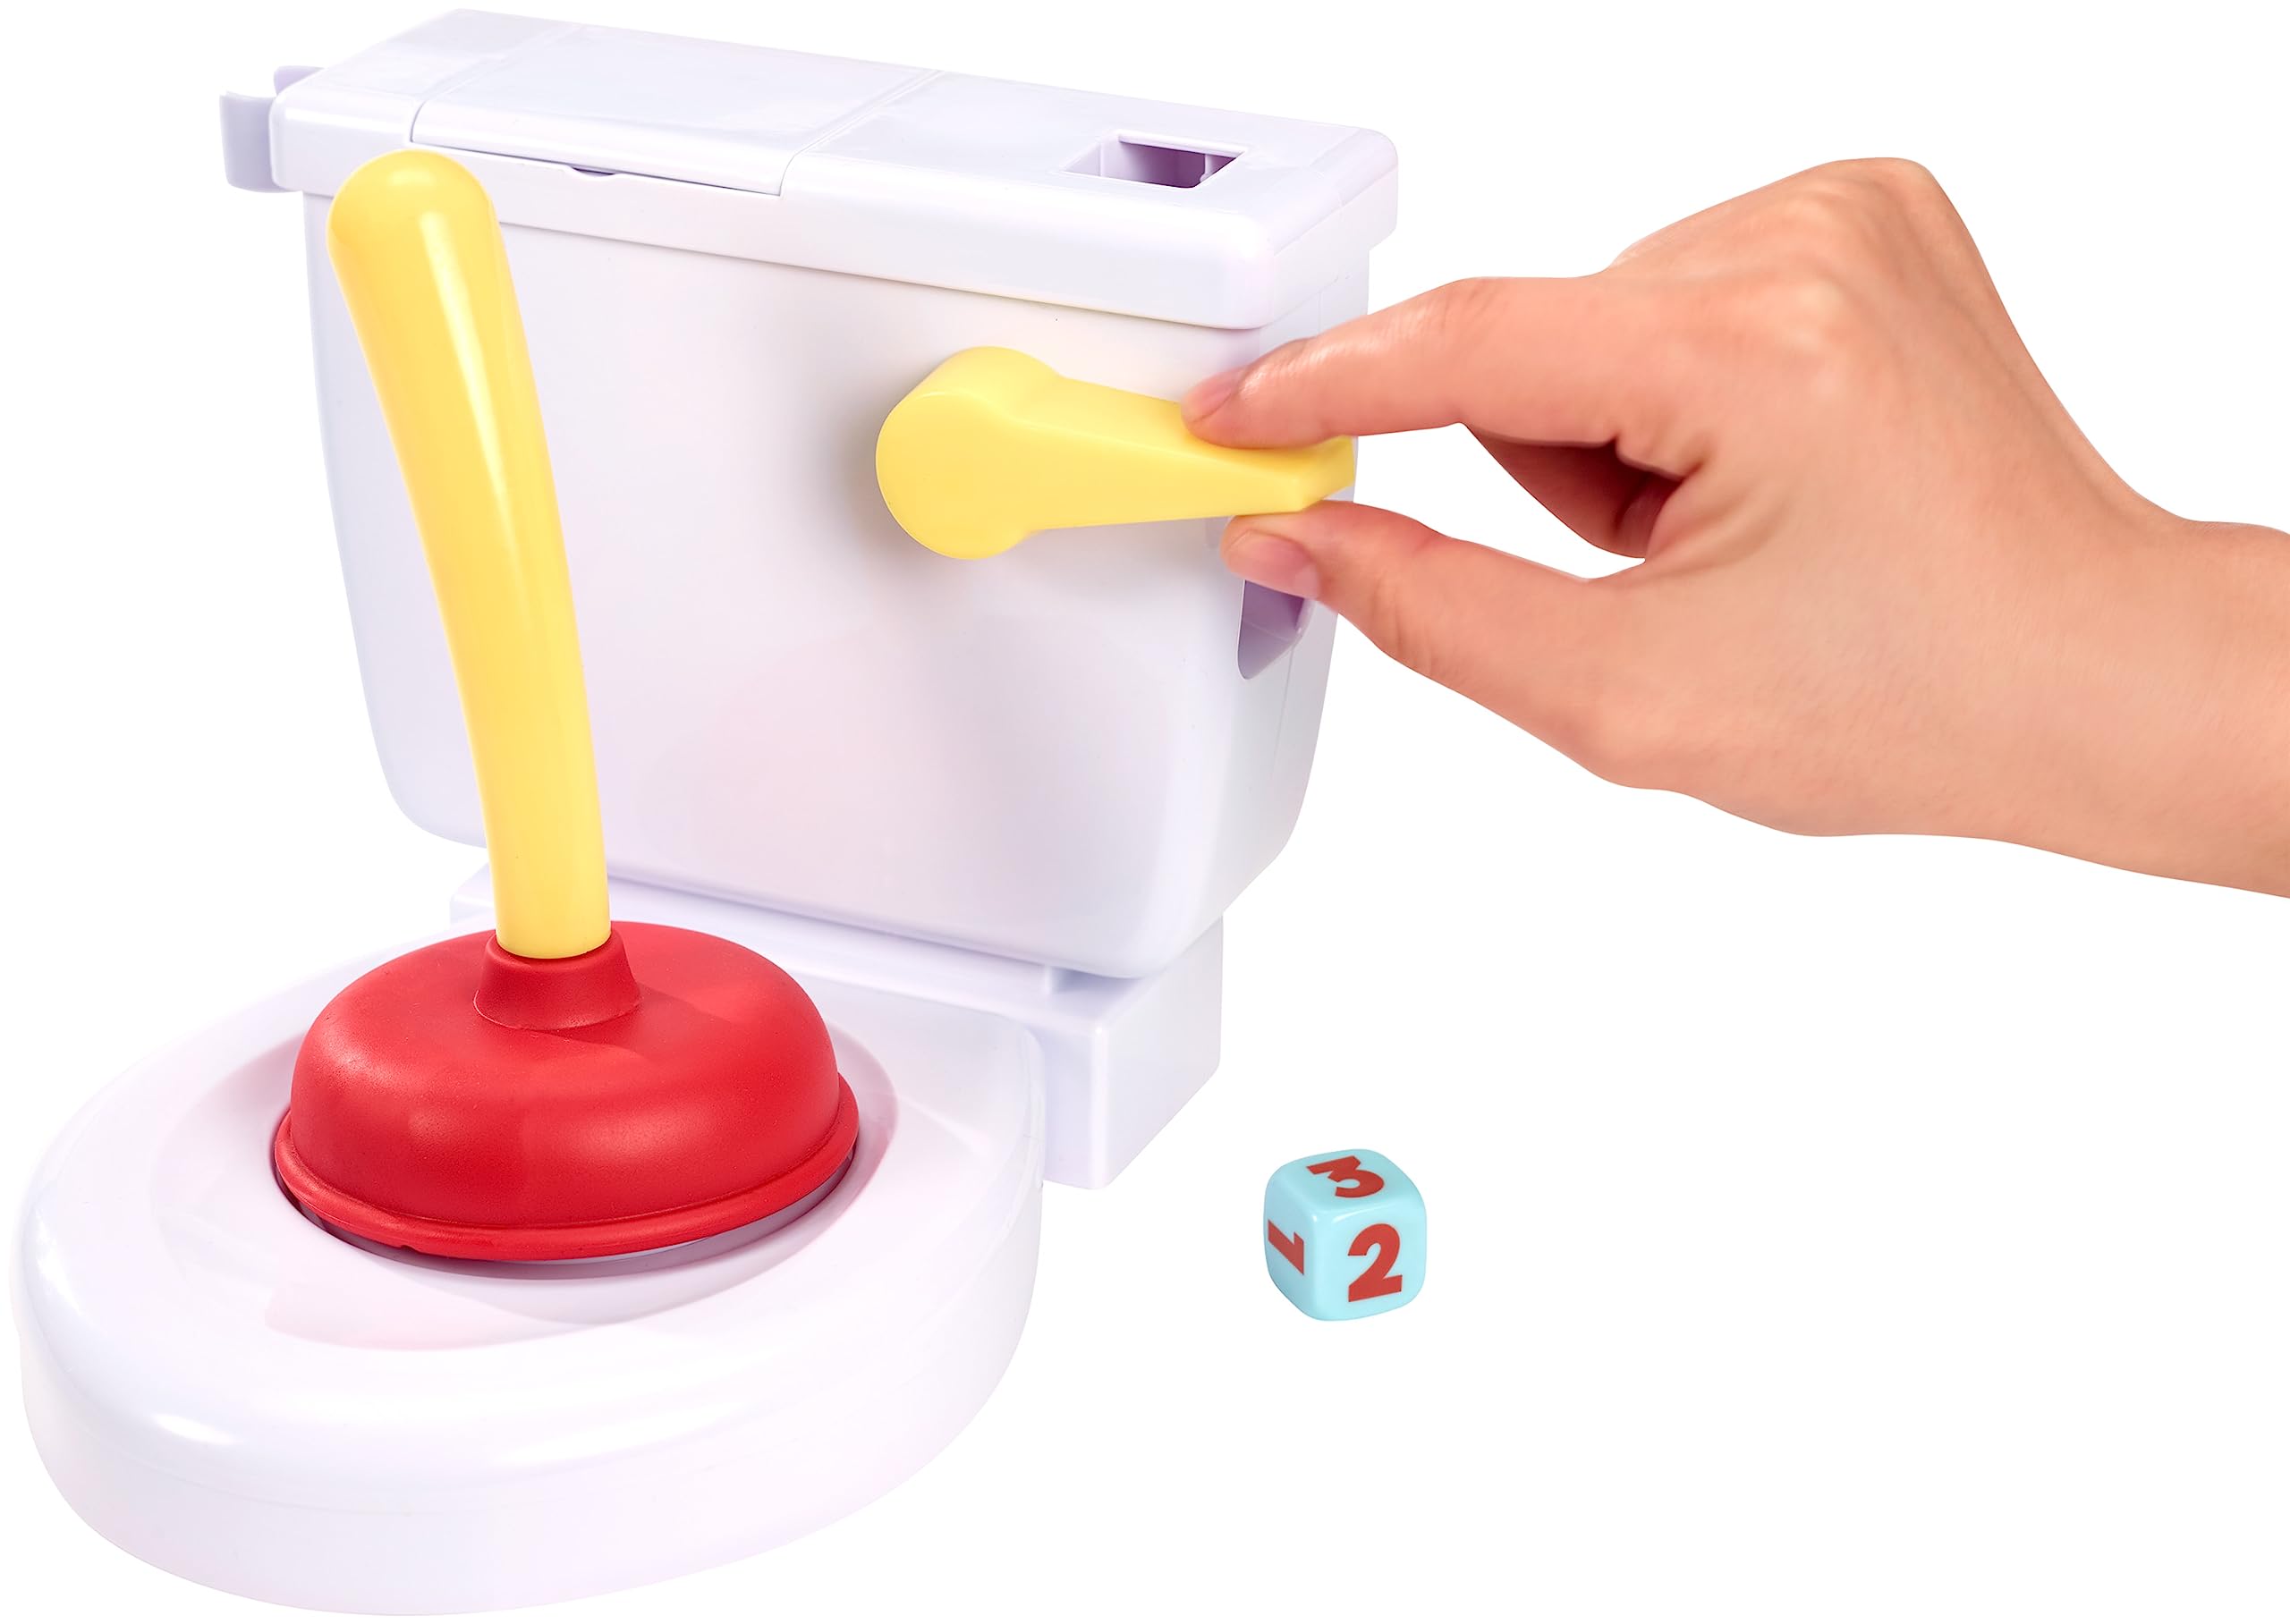 Mattel Games Flushin' Frenzy Kids Game, Family Game with Toilet & Plunger, Grab the Flying Poop for 2-4 Players